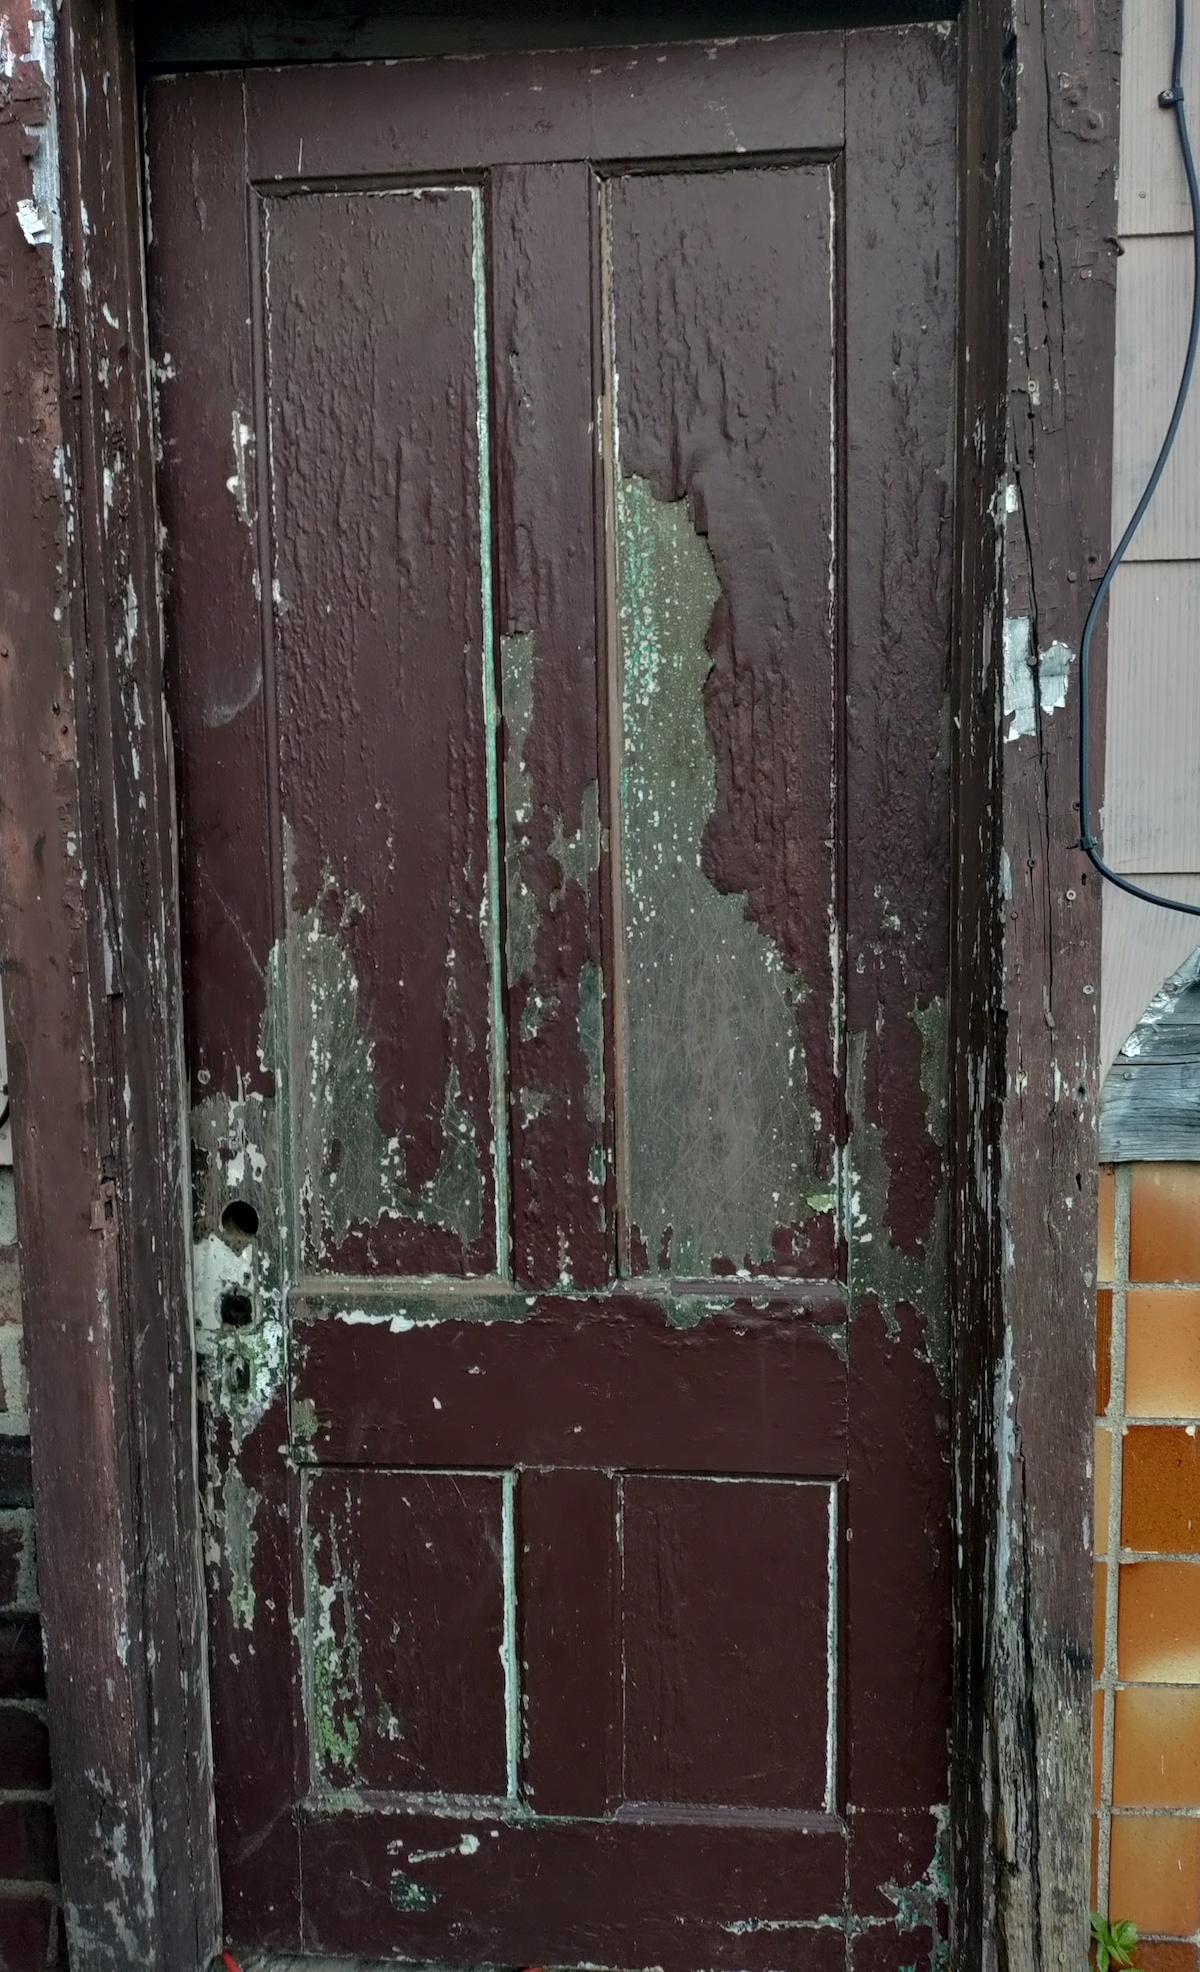 The back door of the Glouster rental home